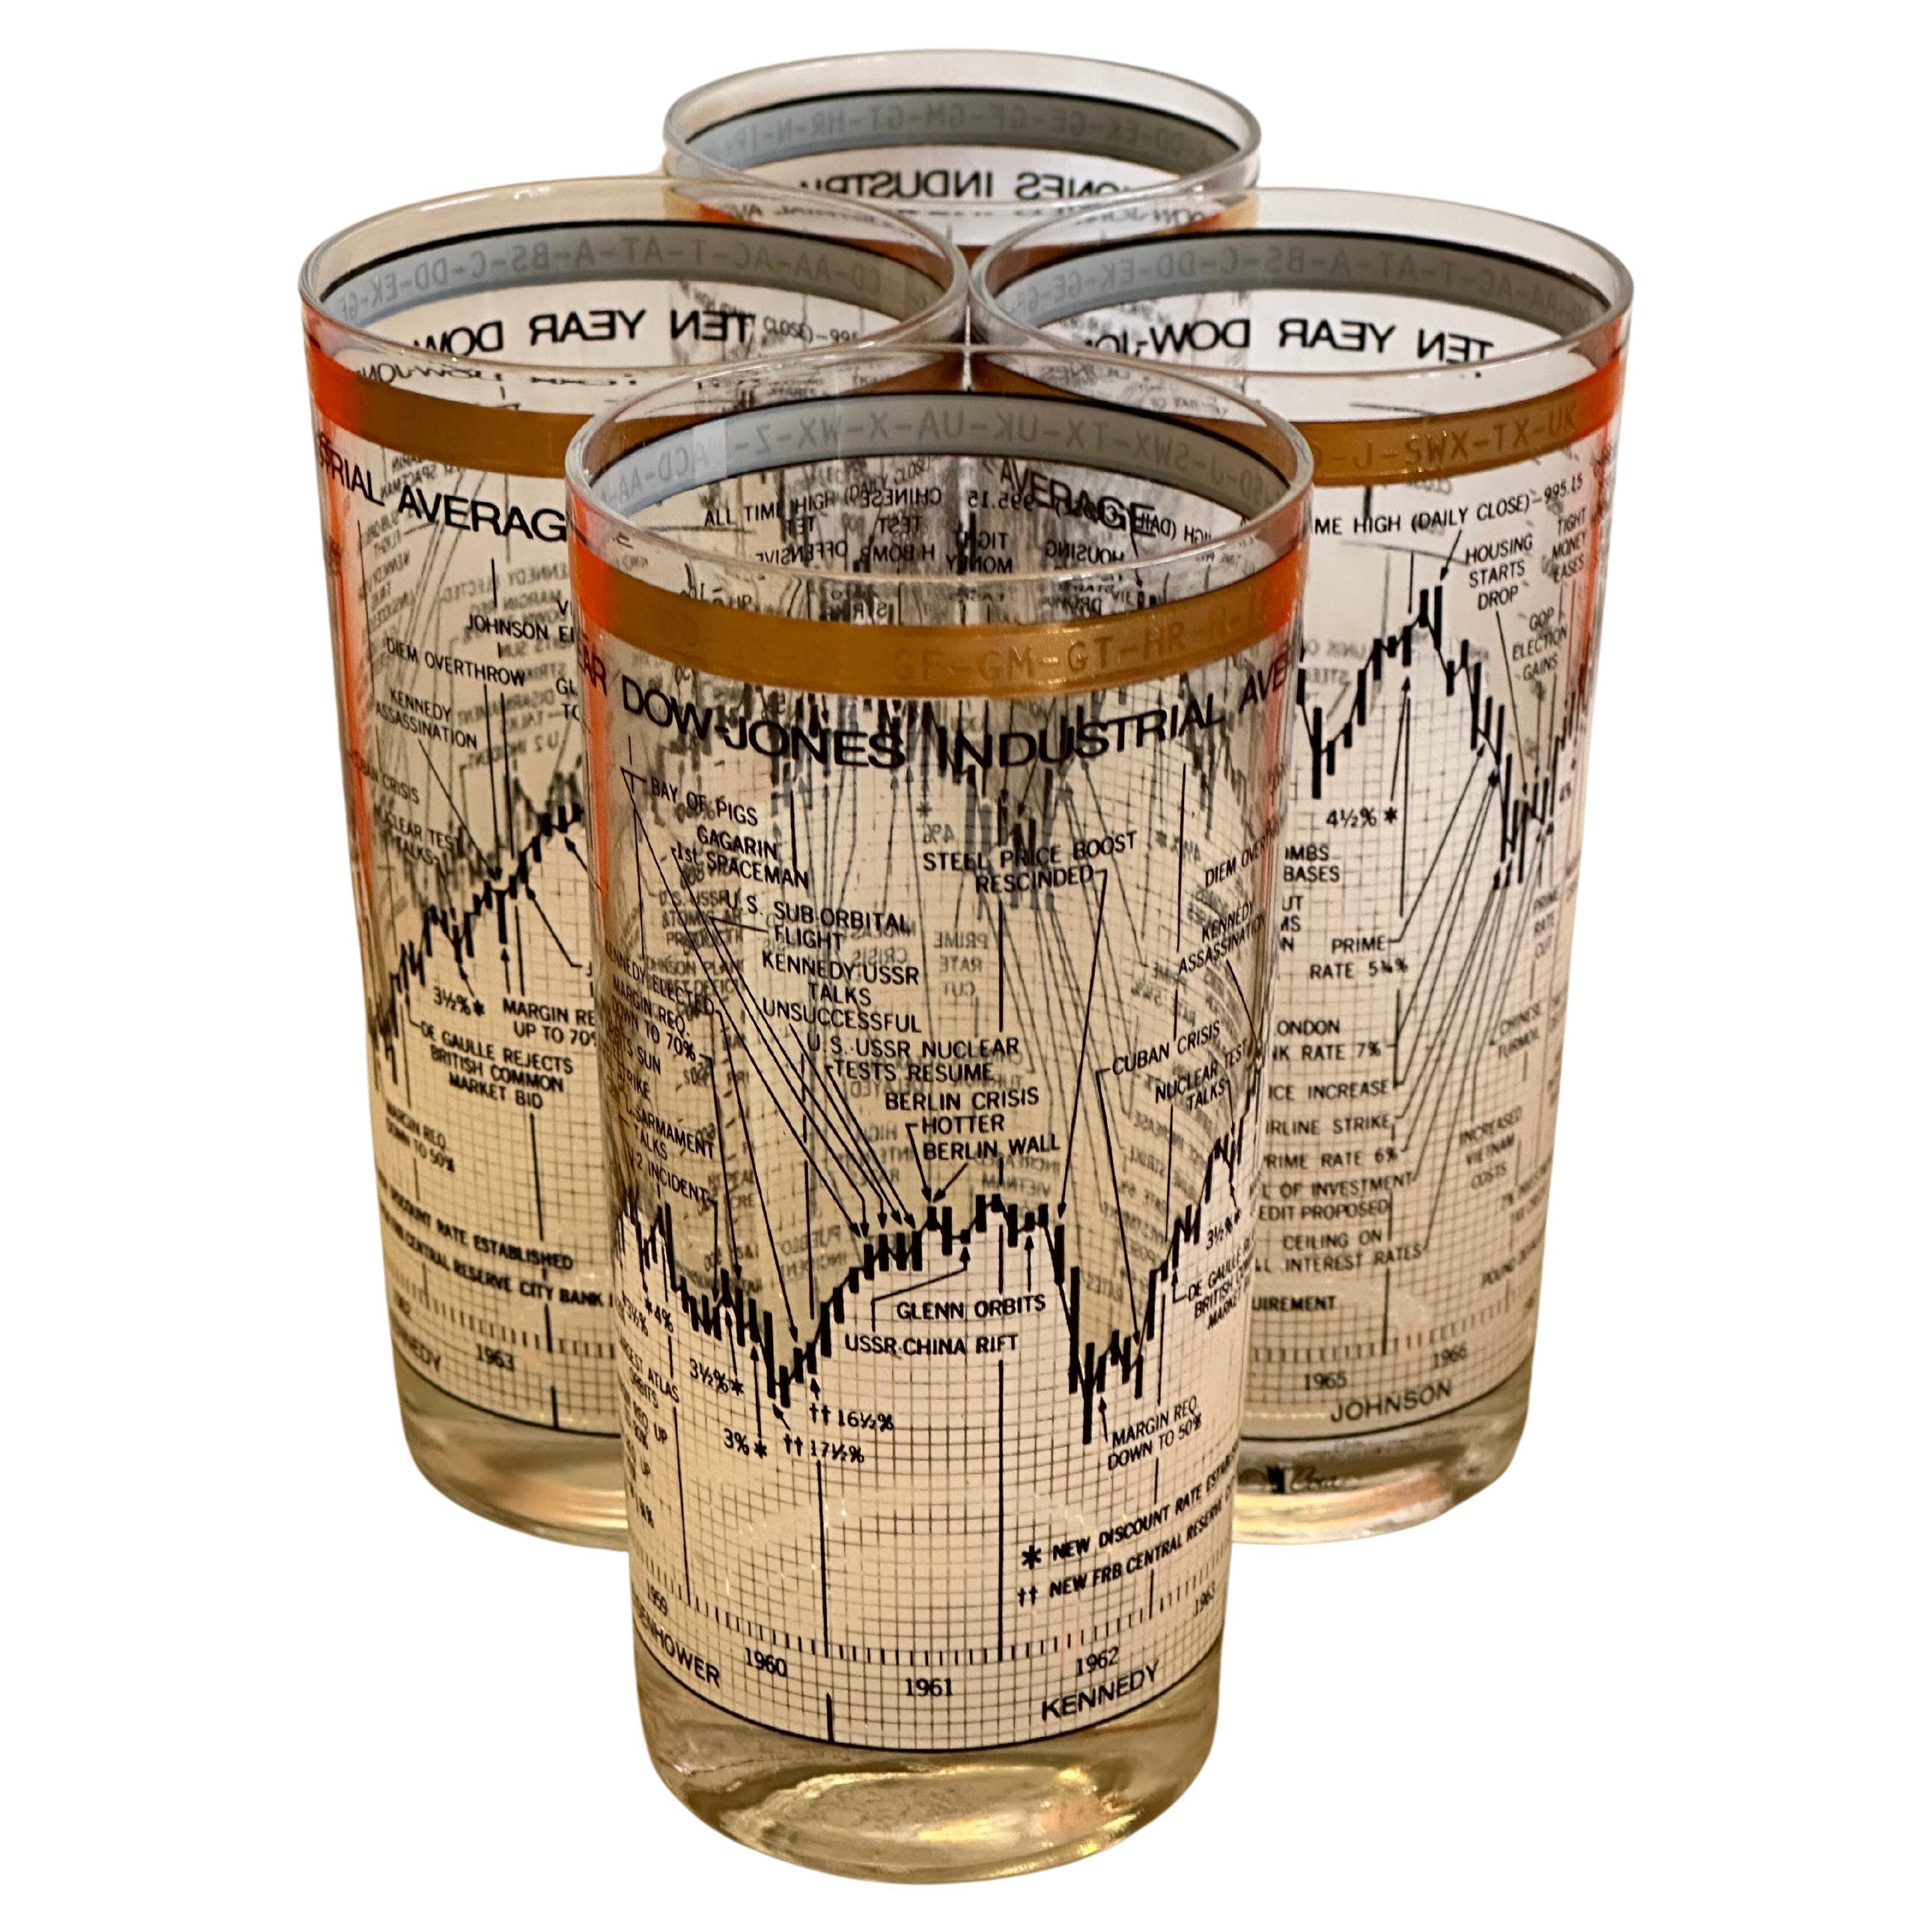 Great set of four tall high ball glasses tracking the Dow Jones Industrial Average (DJIA) from 1958 to 1968 by Cera, circa 1970s.   Each glass captures 10 years of current events and their impact on the stock market. A gold band along the top